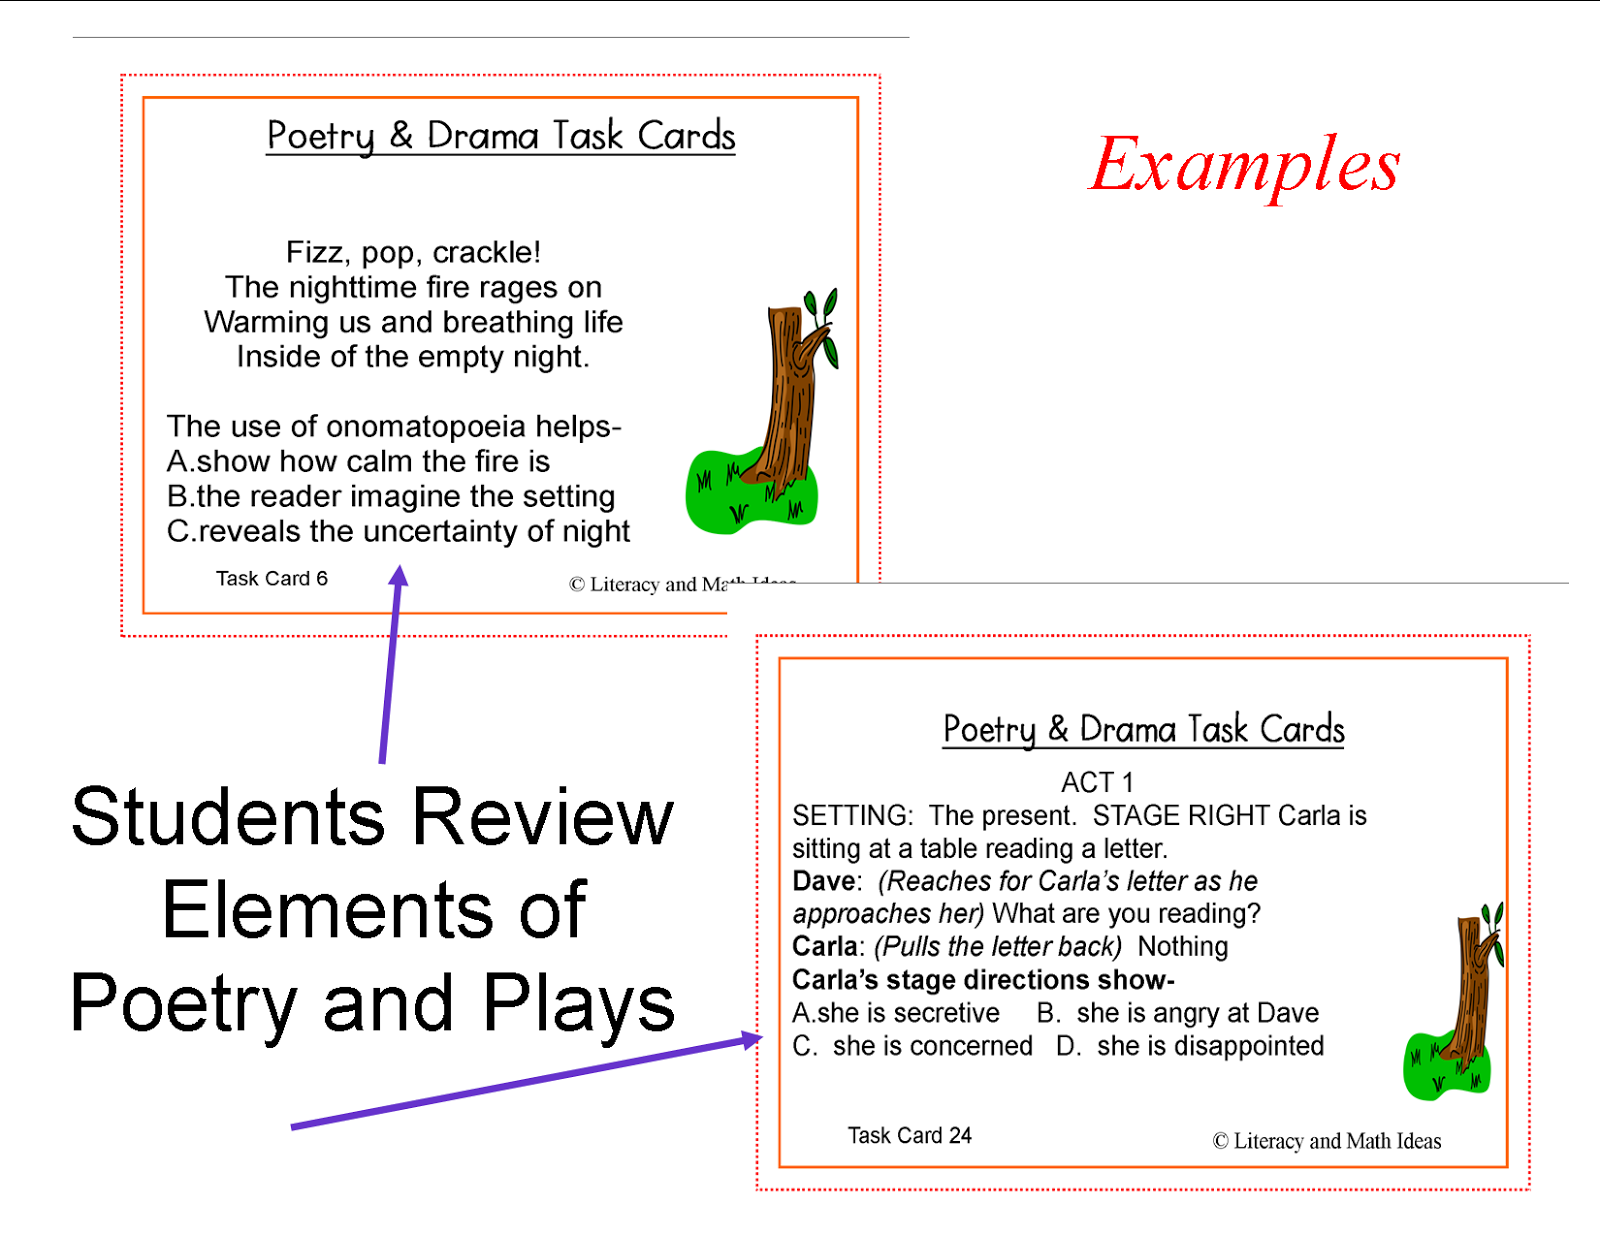 literacy-math-ideas-poetry-and-drama-task-cards